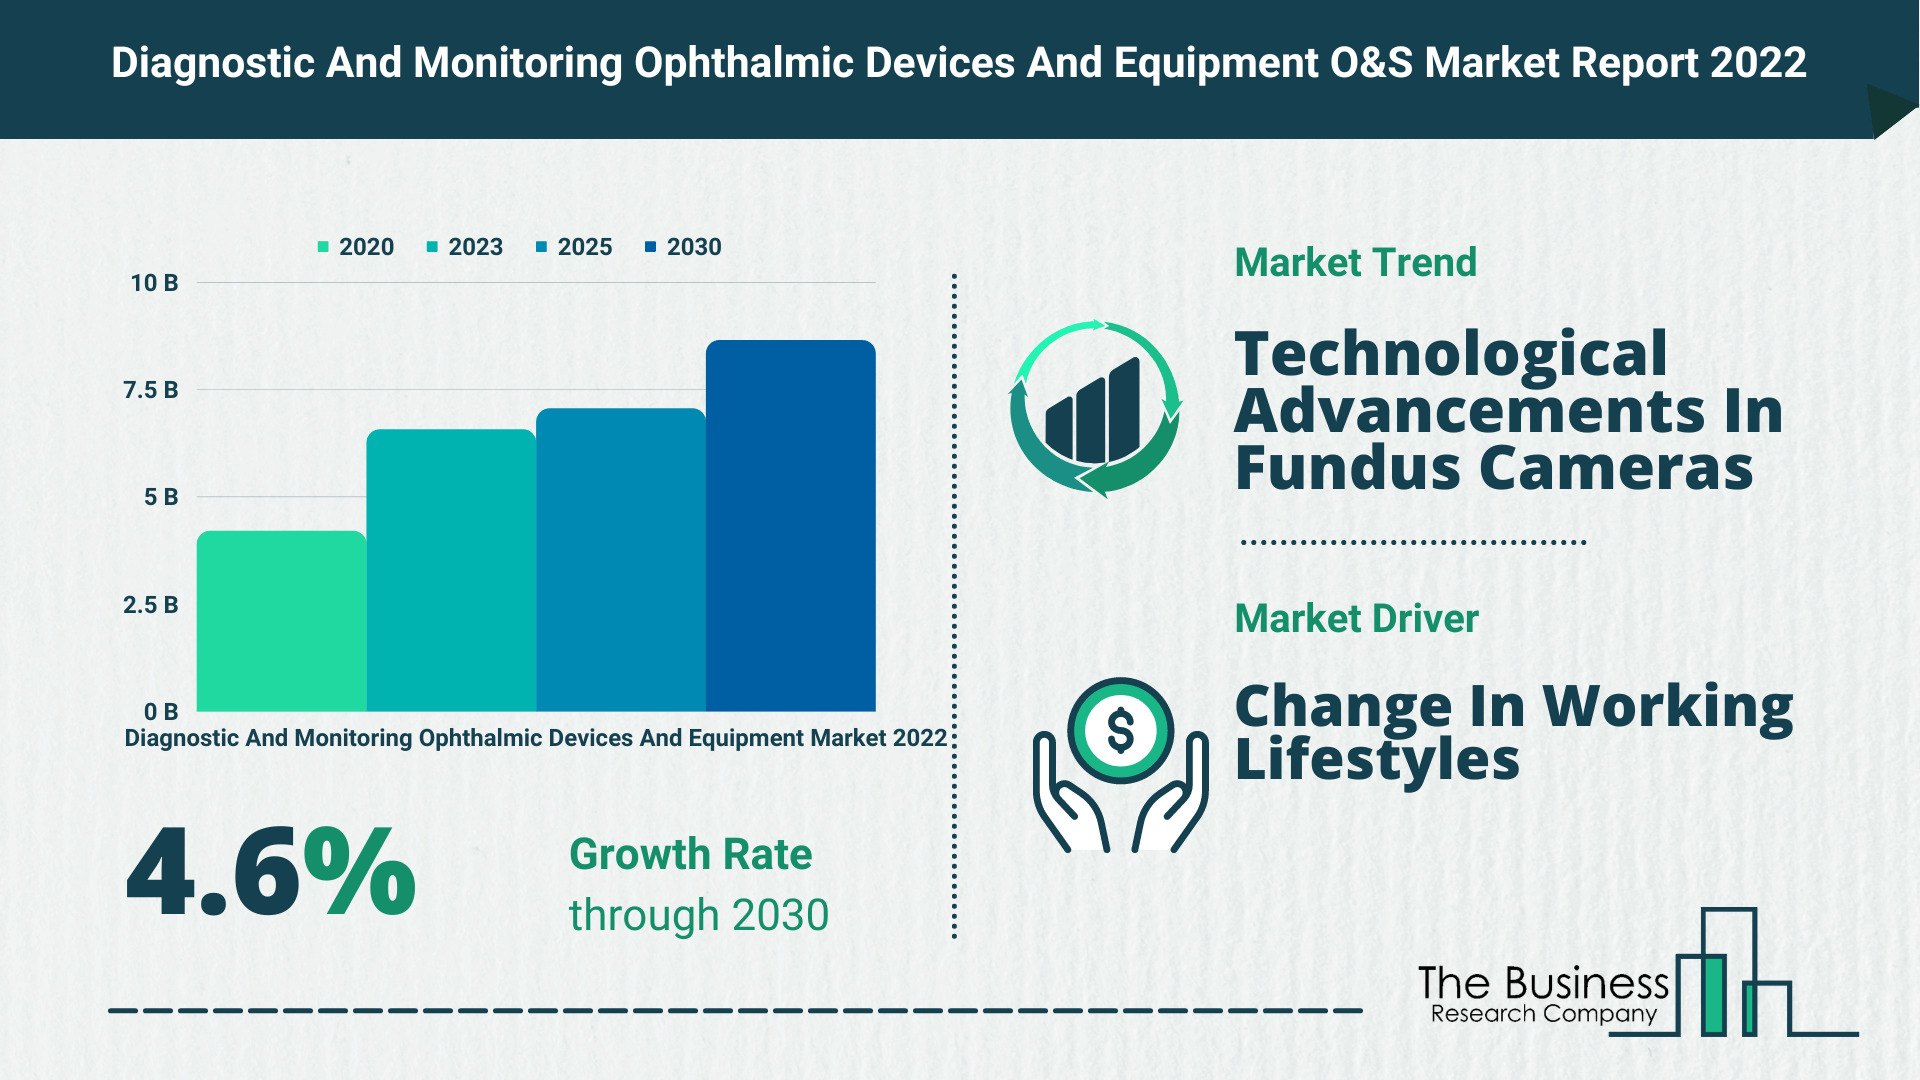 Growth Driving Opportunities And Strategies In The Diagnostic And Monitoring Ophthalmic Devices And Equipment Market.